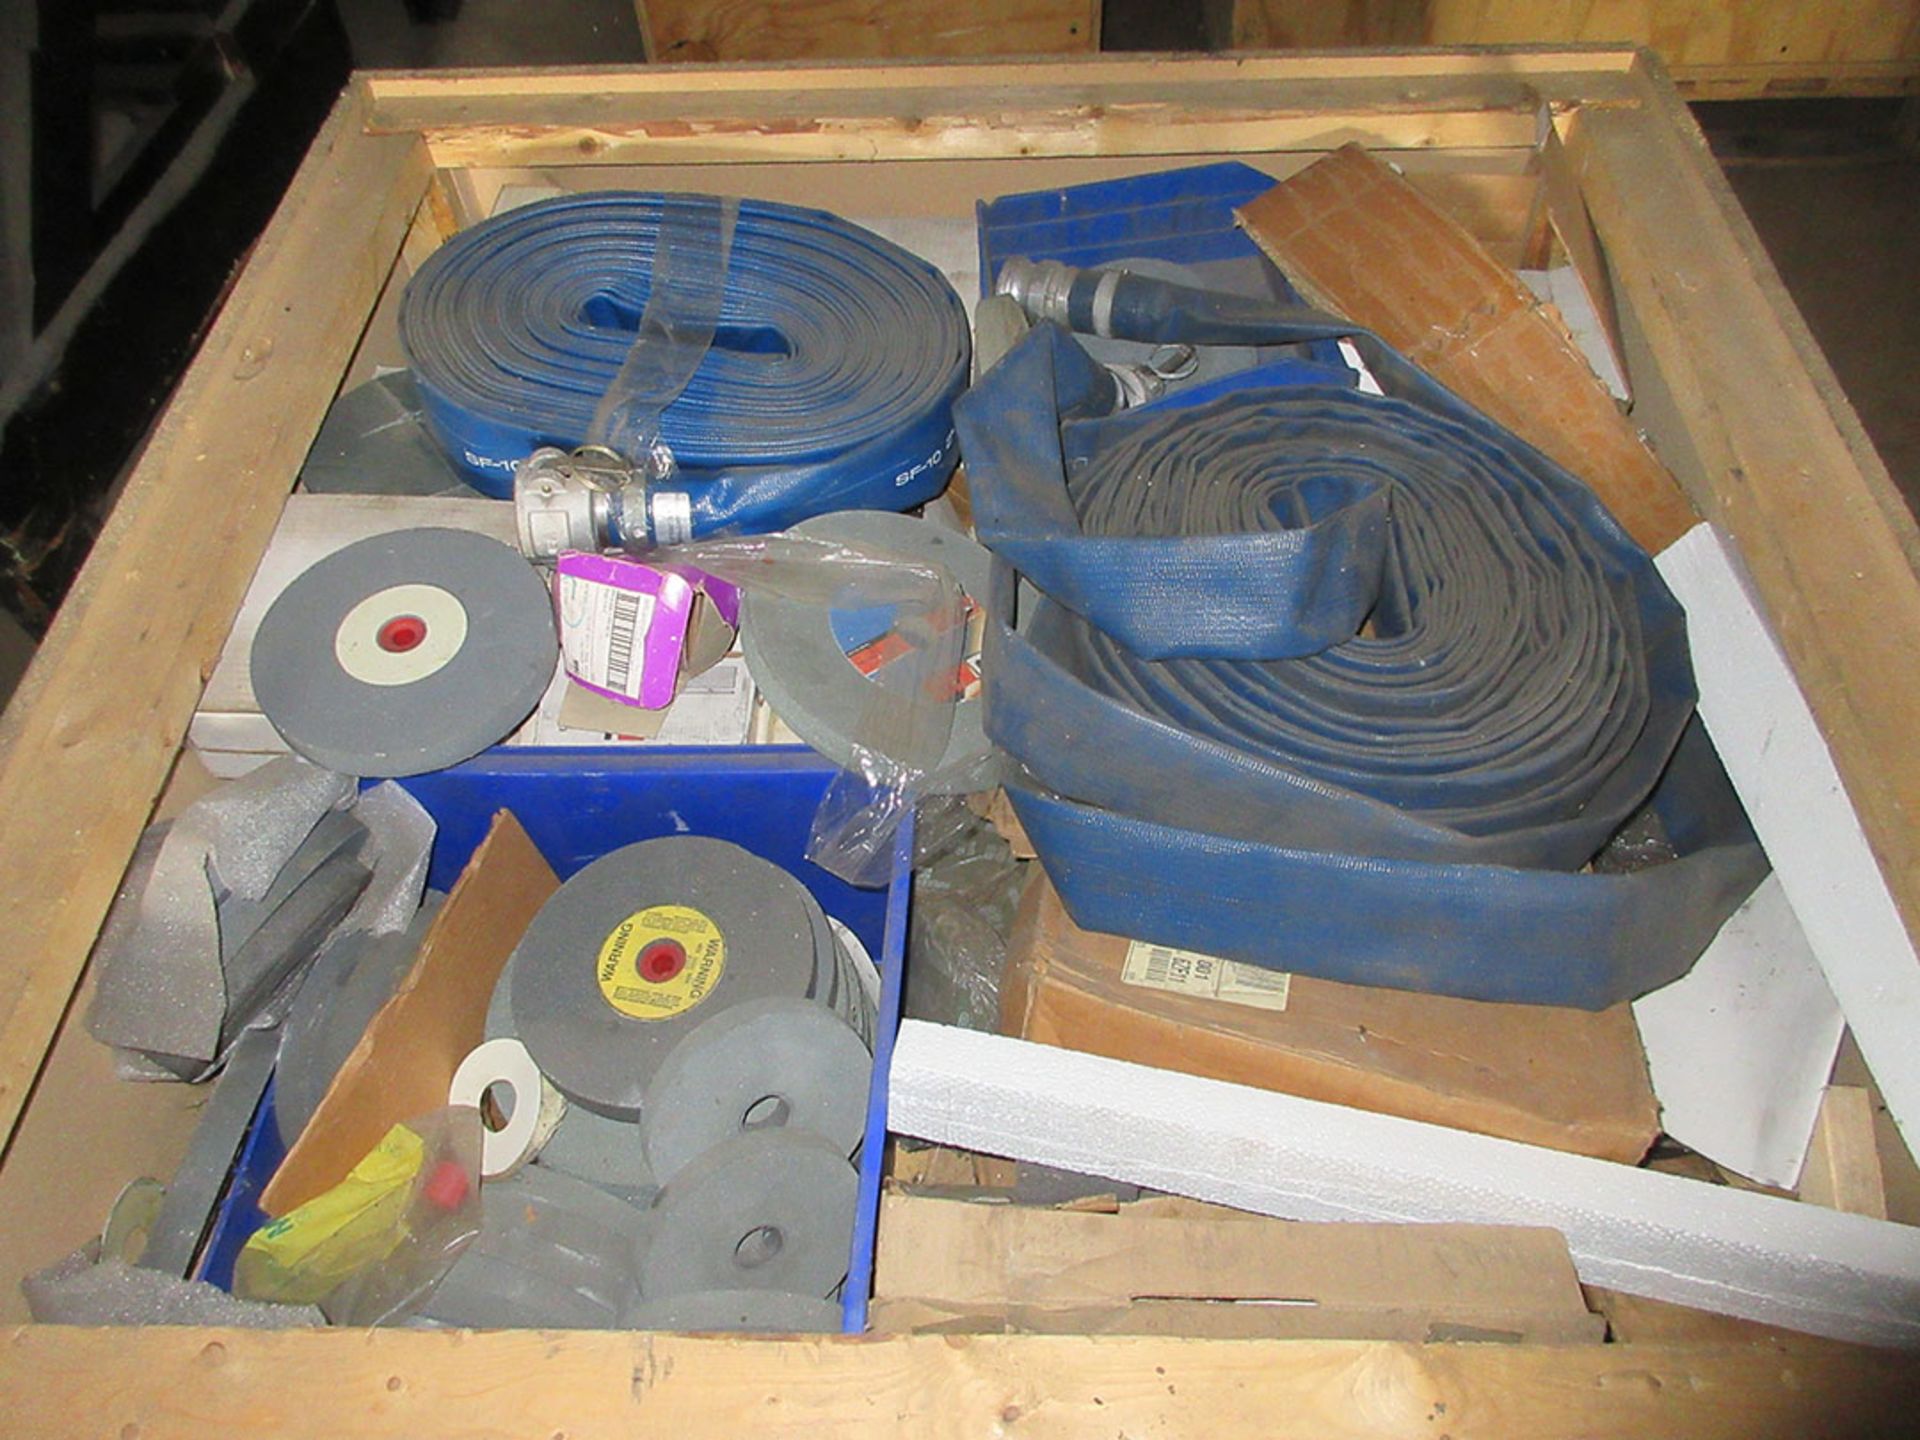 (5) CRATES WITH WATER HOSE, ABRASIVE DISCS, CYLINDERS, INDUCTION MOTORS, AND ELECTRICAL ITEMS